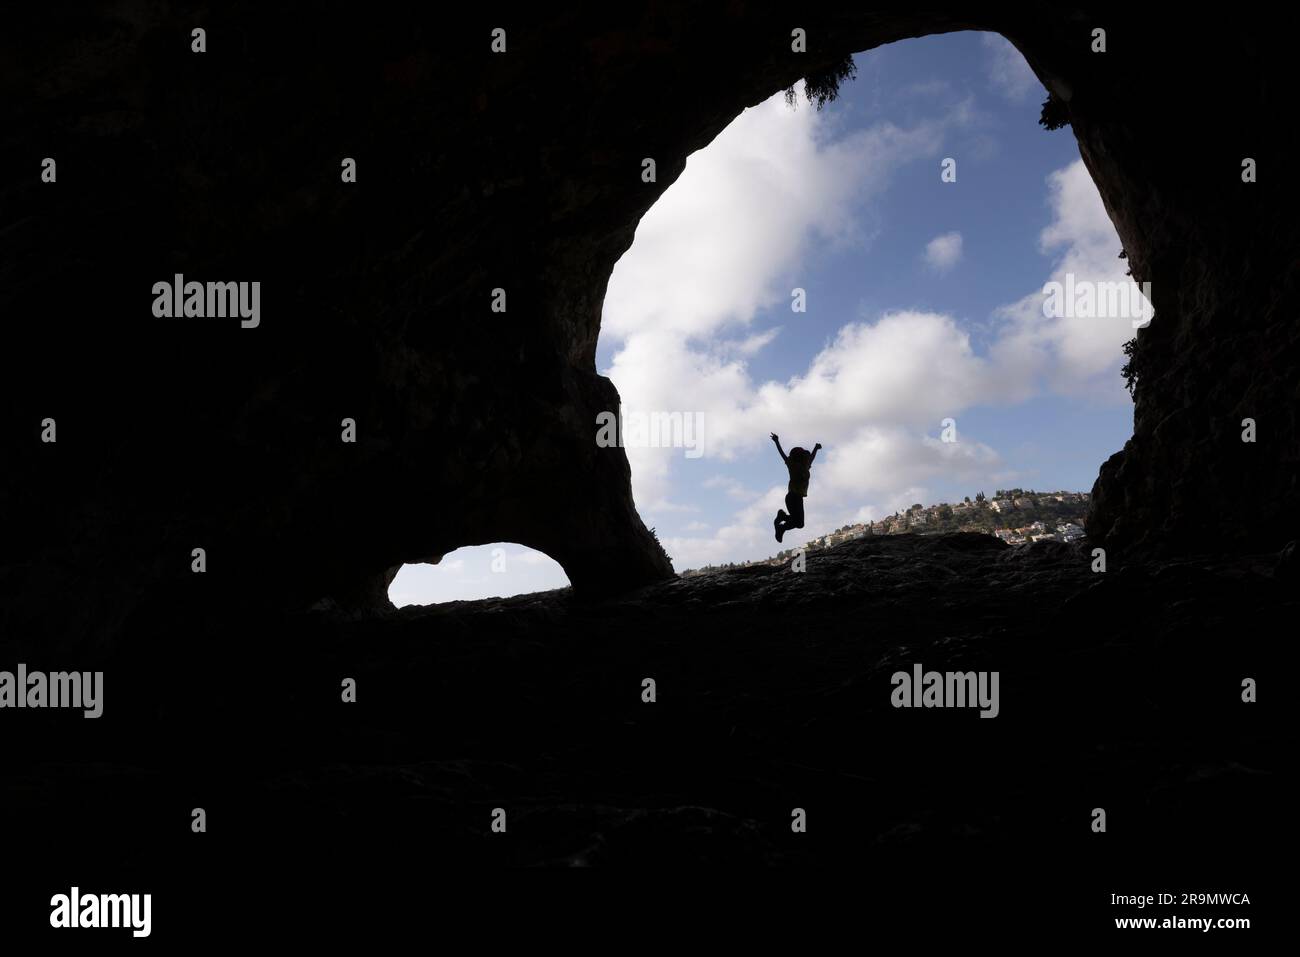 Silhouette of an excited hiker jumping with joy on reaching his destination Stock Photo